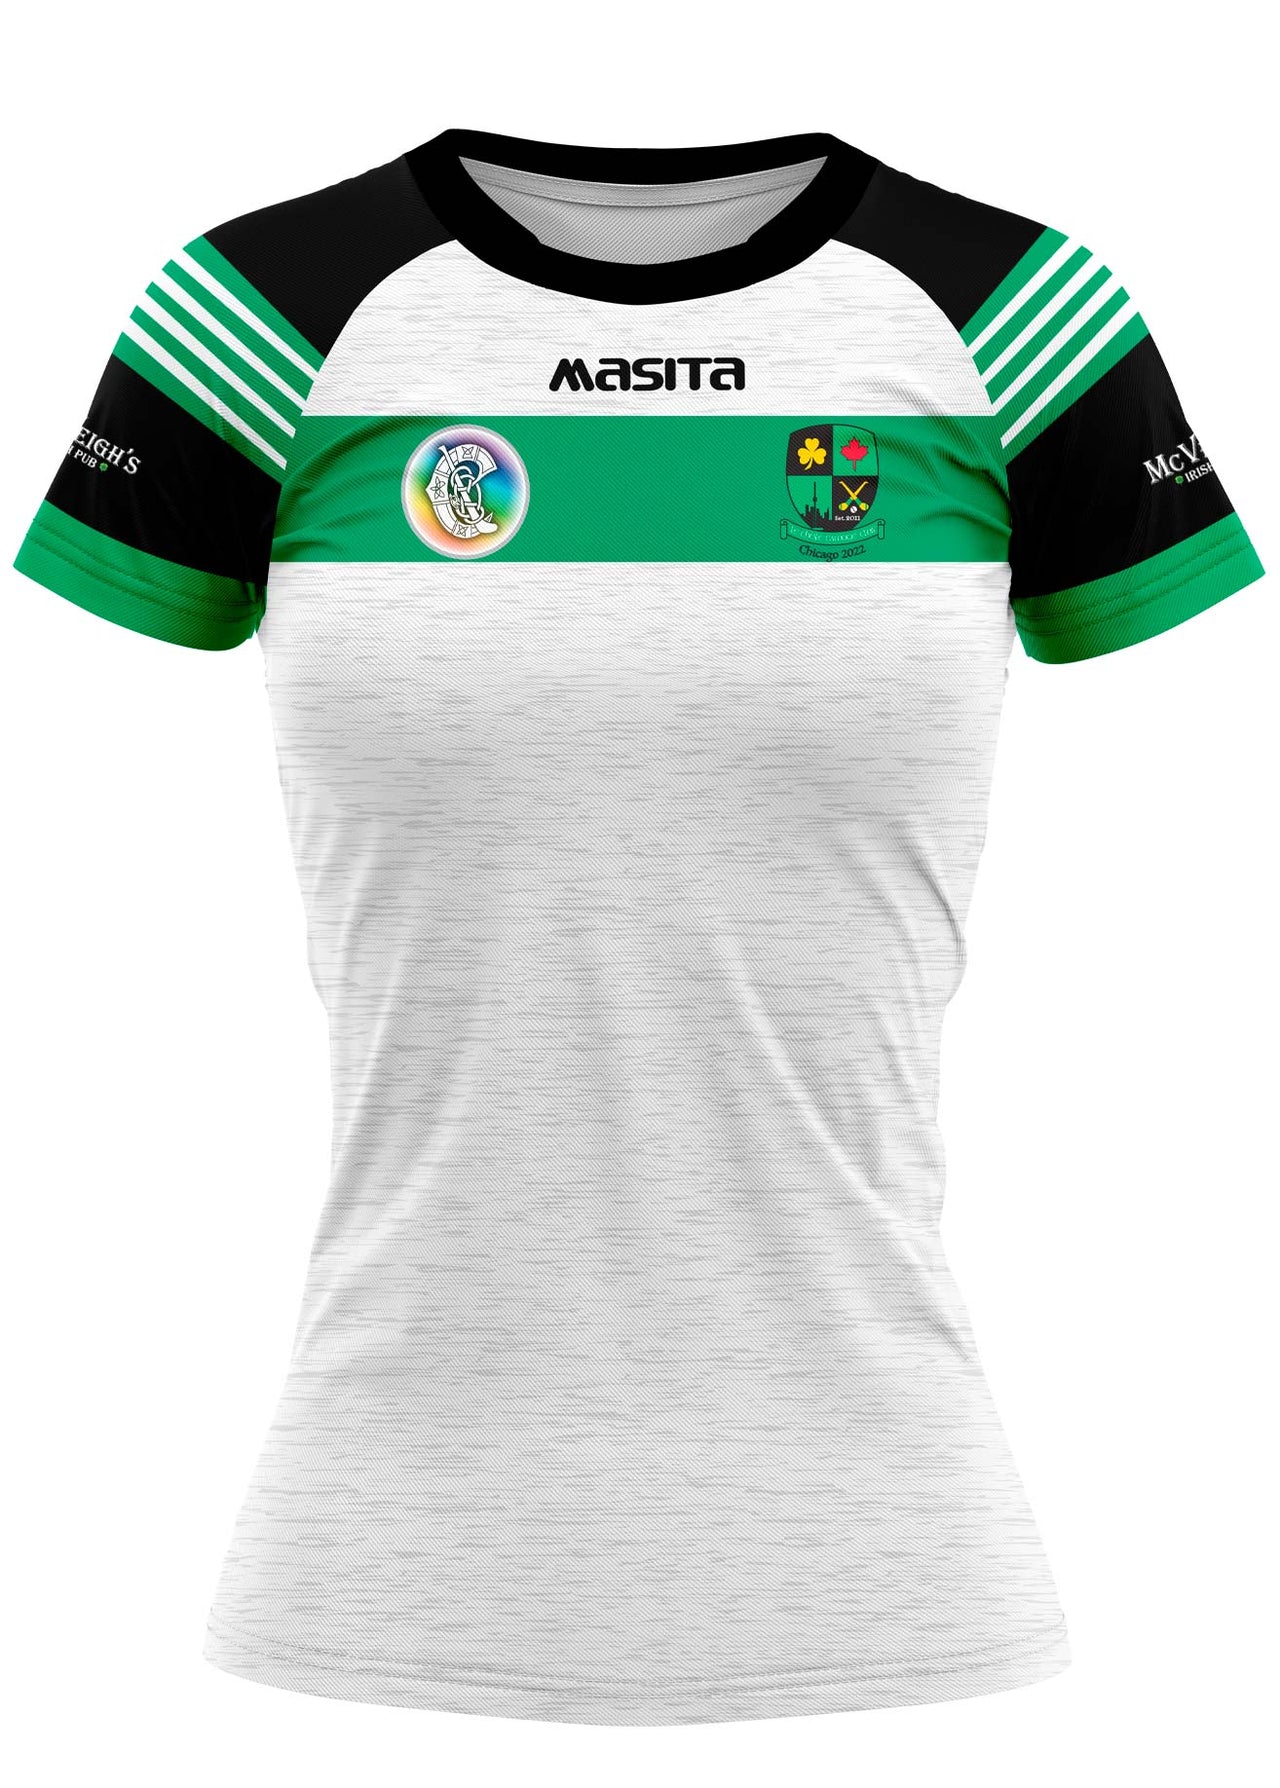 Le Cheile Camogie Away Jersey Regular Fit Adult